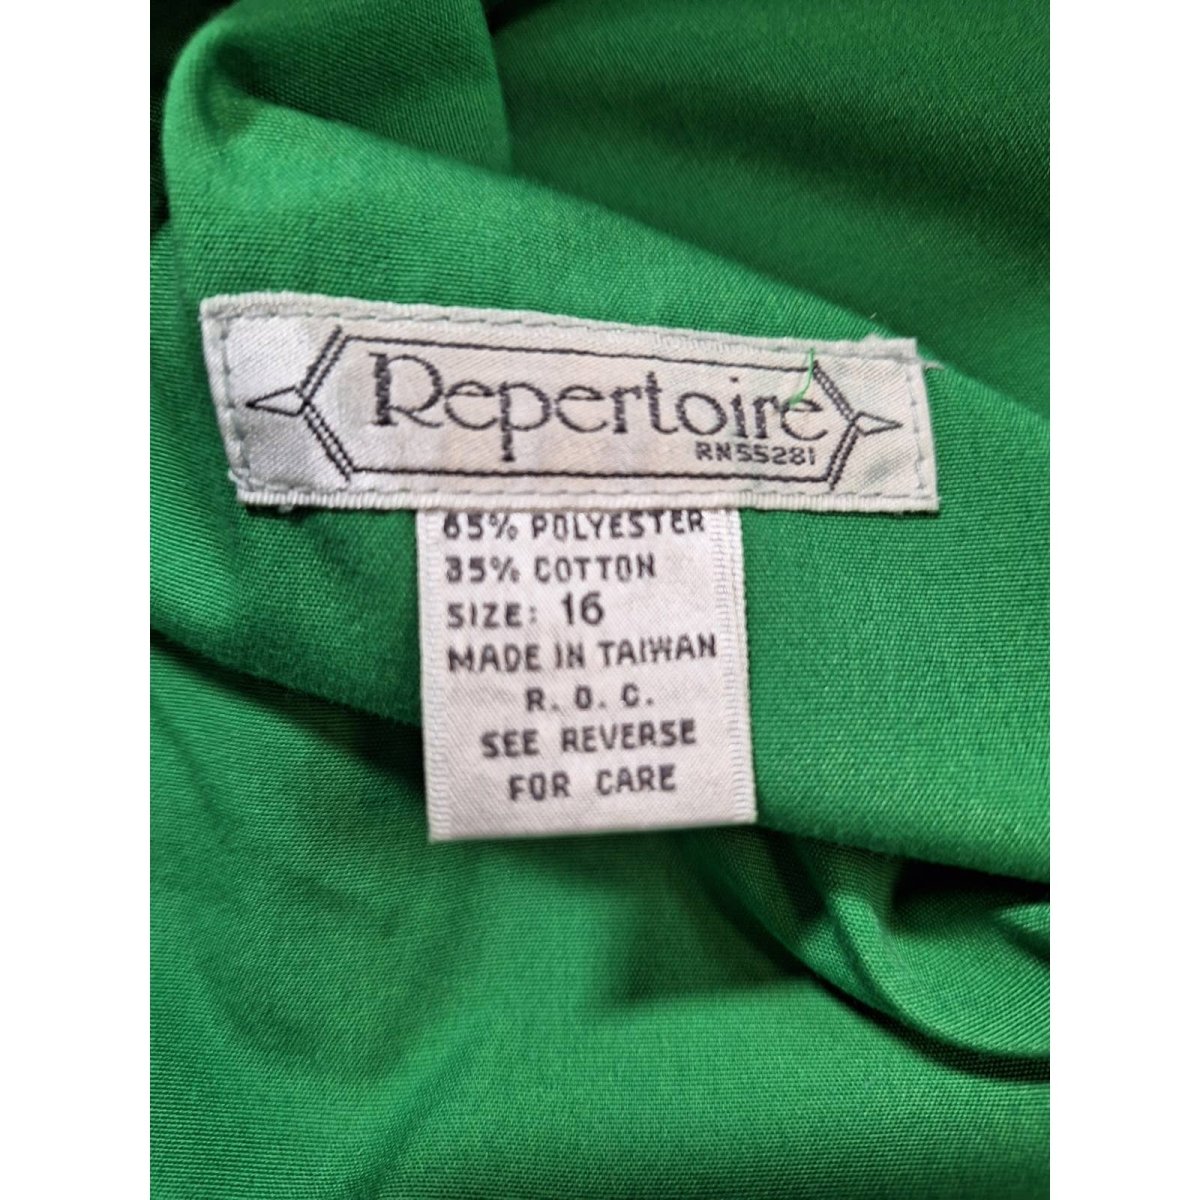 Vintage 70s/80s Green A Line Button Front Skirt Size 16 Waist 38 - themallvintage The Mall Vintage